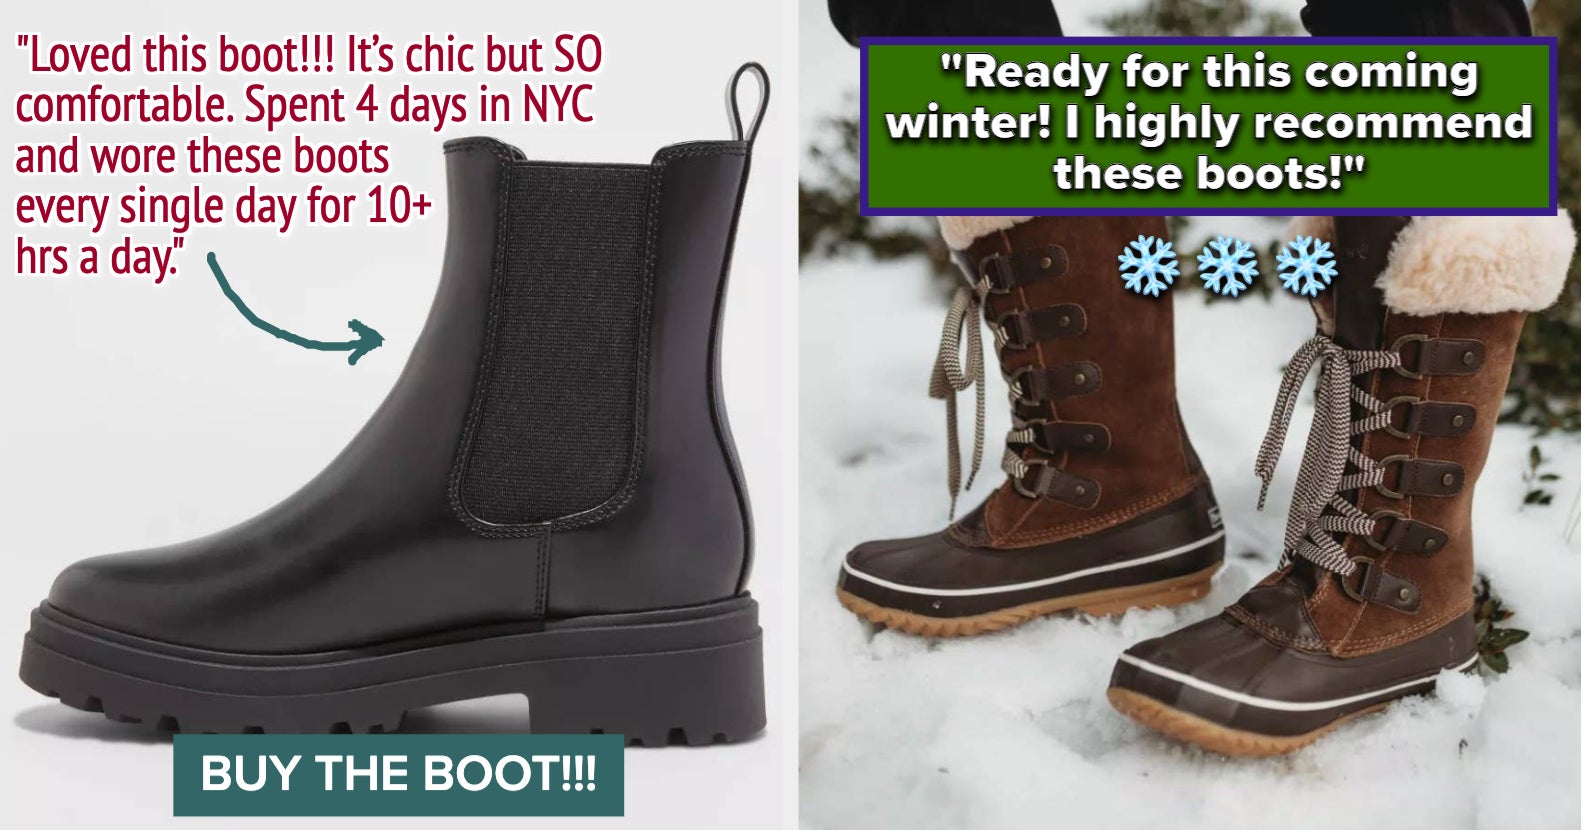 Here's what footwear experts look for when buying winter boots